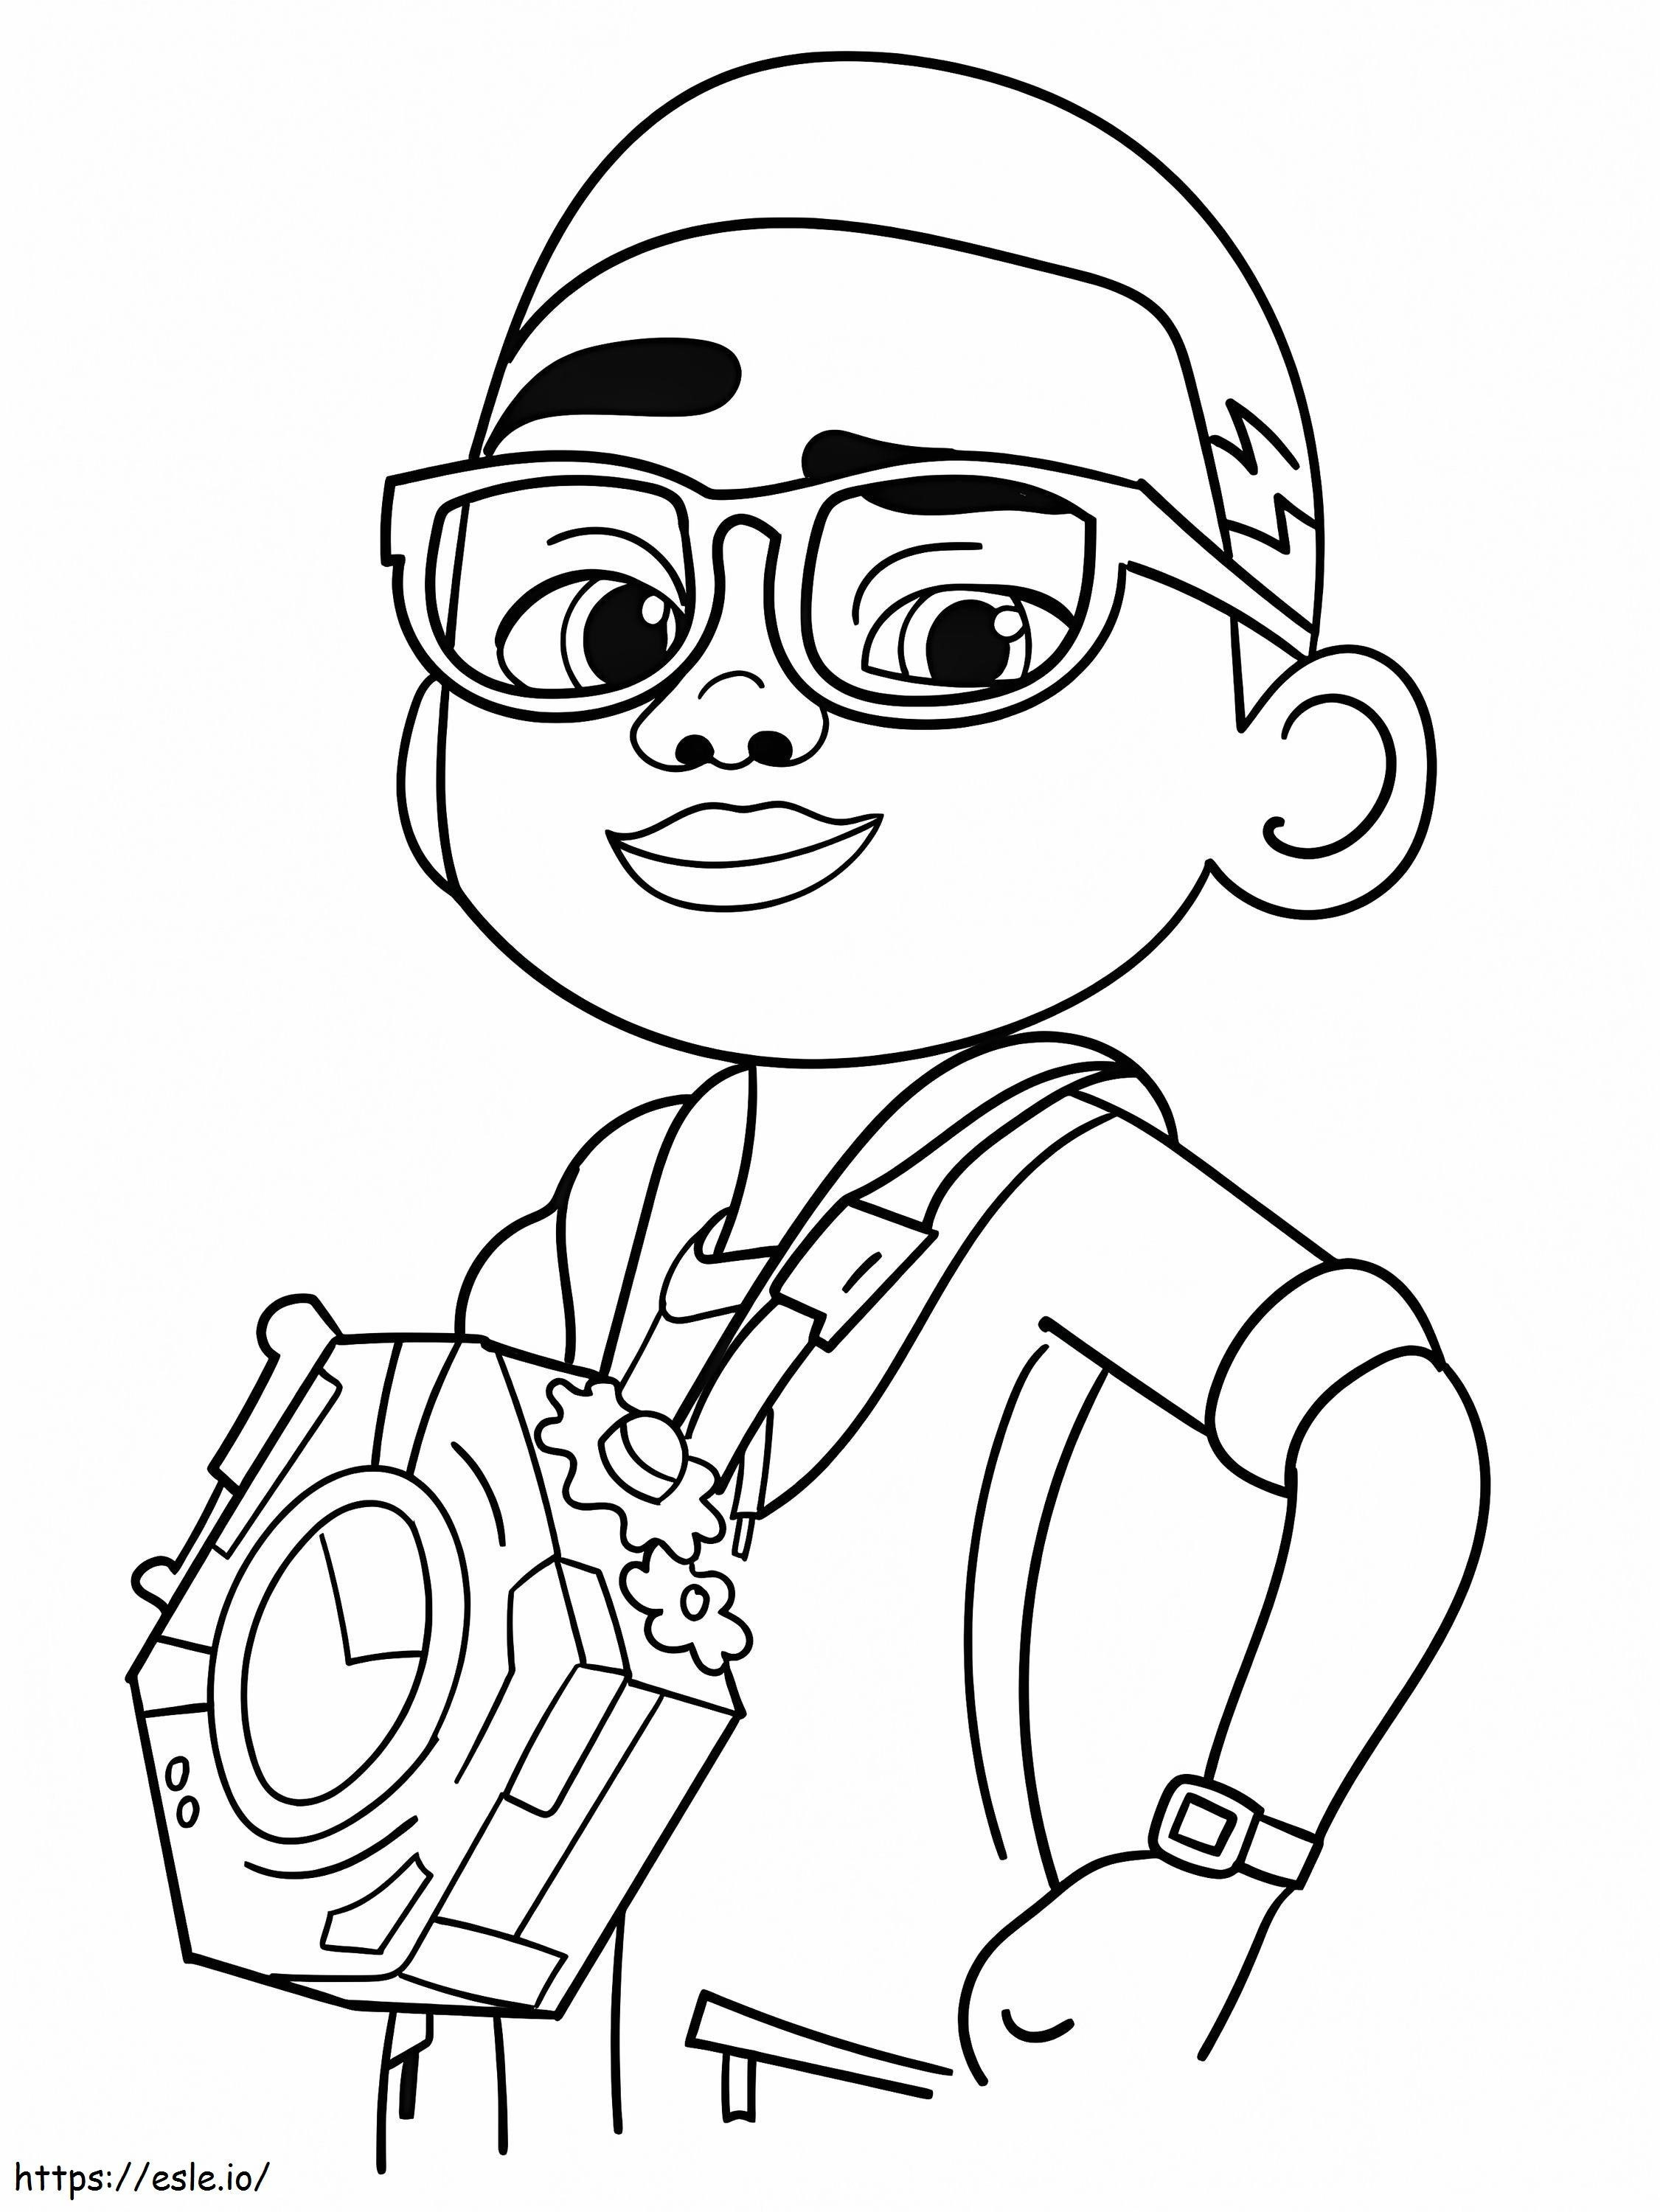 Keys From Karmas World coloring page